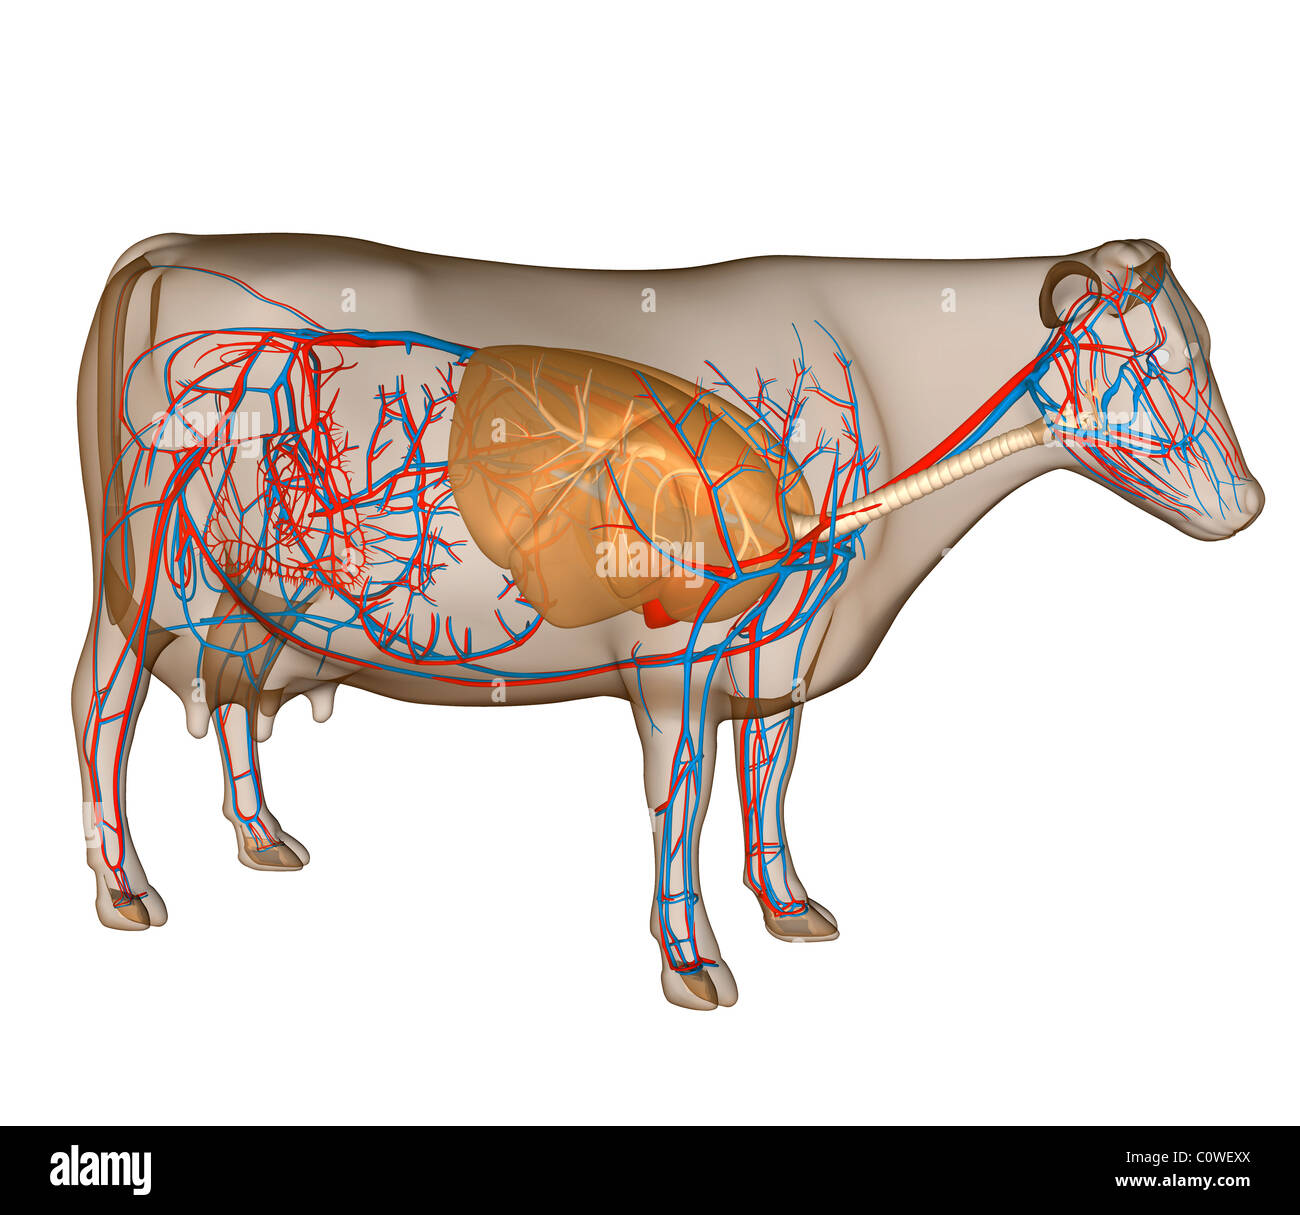 Cattle Respiratory System Diagram - toxoplasmosis